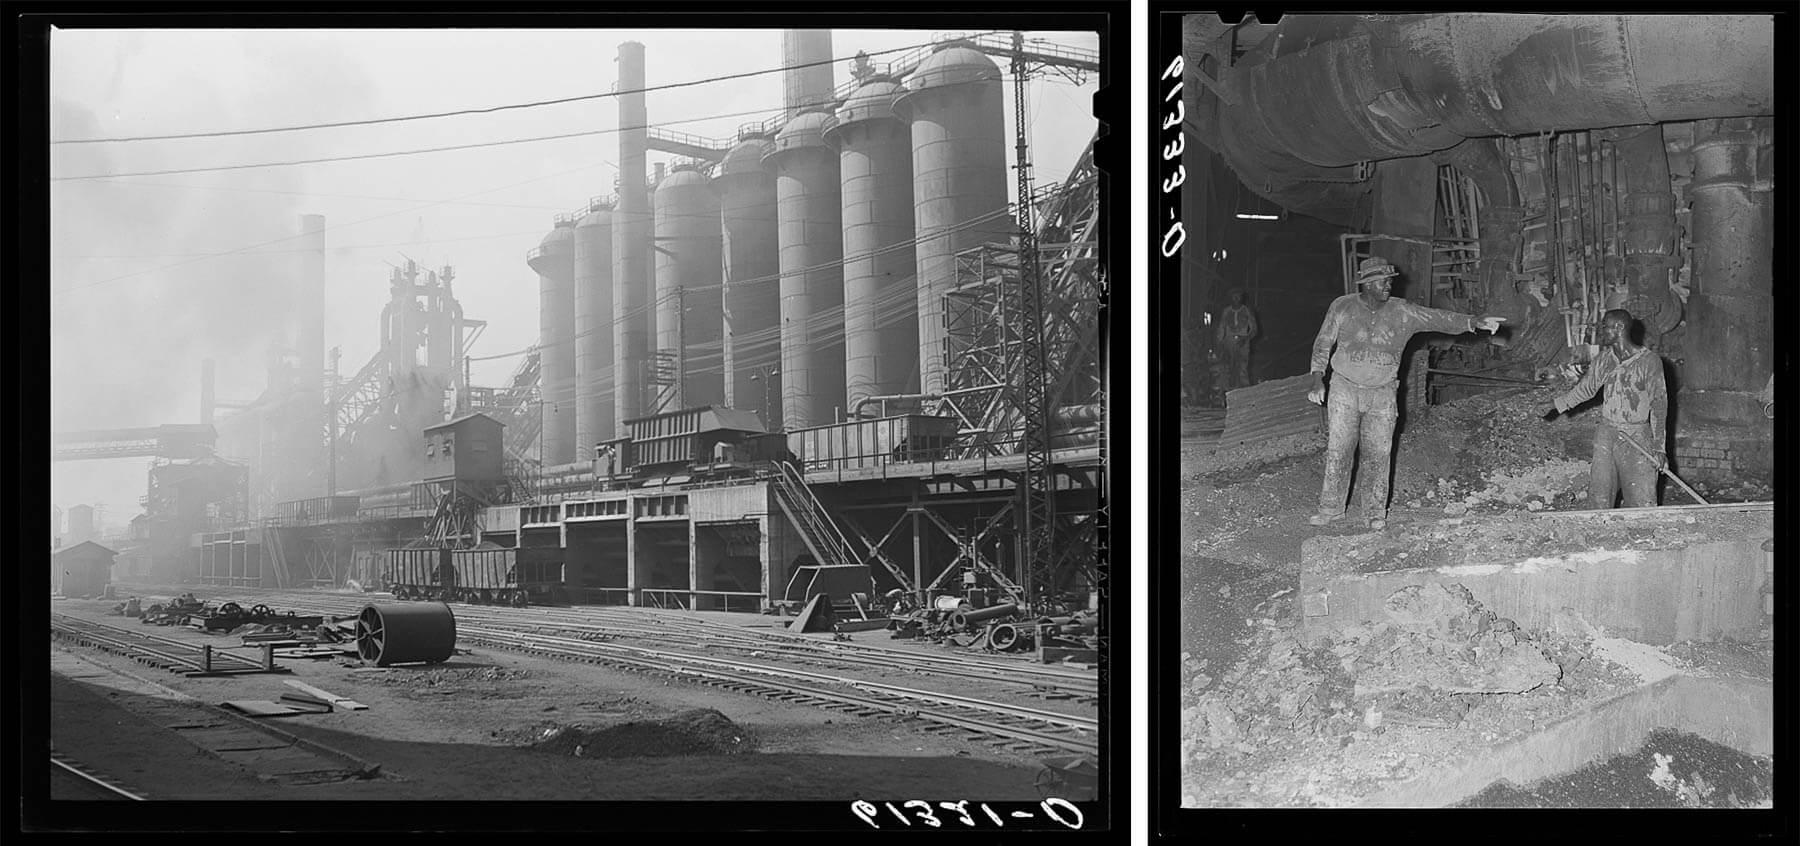 For over 80 years, Bethlehem Steel operated the Sparrows Point Steel Mill just across Bear Creek from Turner Station. The mill produced iron, steel and built ships. &ldquo;There was 24/7 noise,&rdquo; said Larry Bannerman. &ldquo;We could hear them making the steel. Whistles going off &hellip; It was all day, everyday noise.&rdquo; (Photo from Library of Congress, Prints &amp; Photographs Division, Farm Security Administration Office of War Information Black-and-White Negatives)